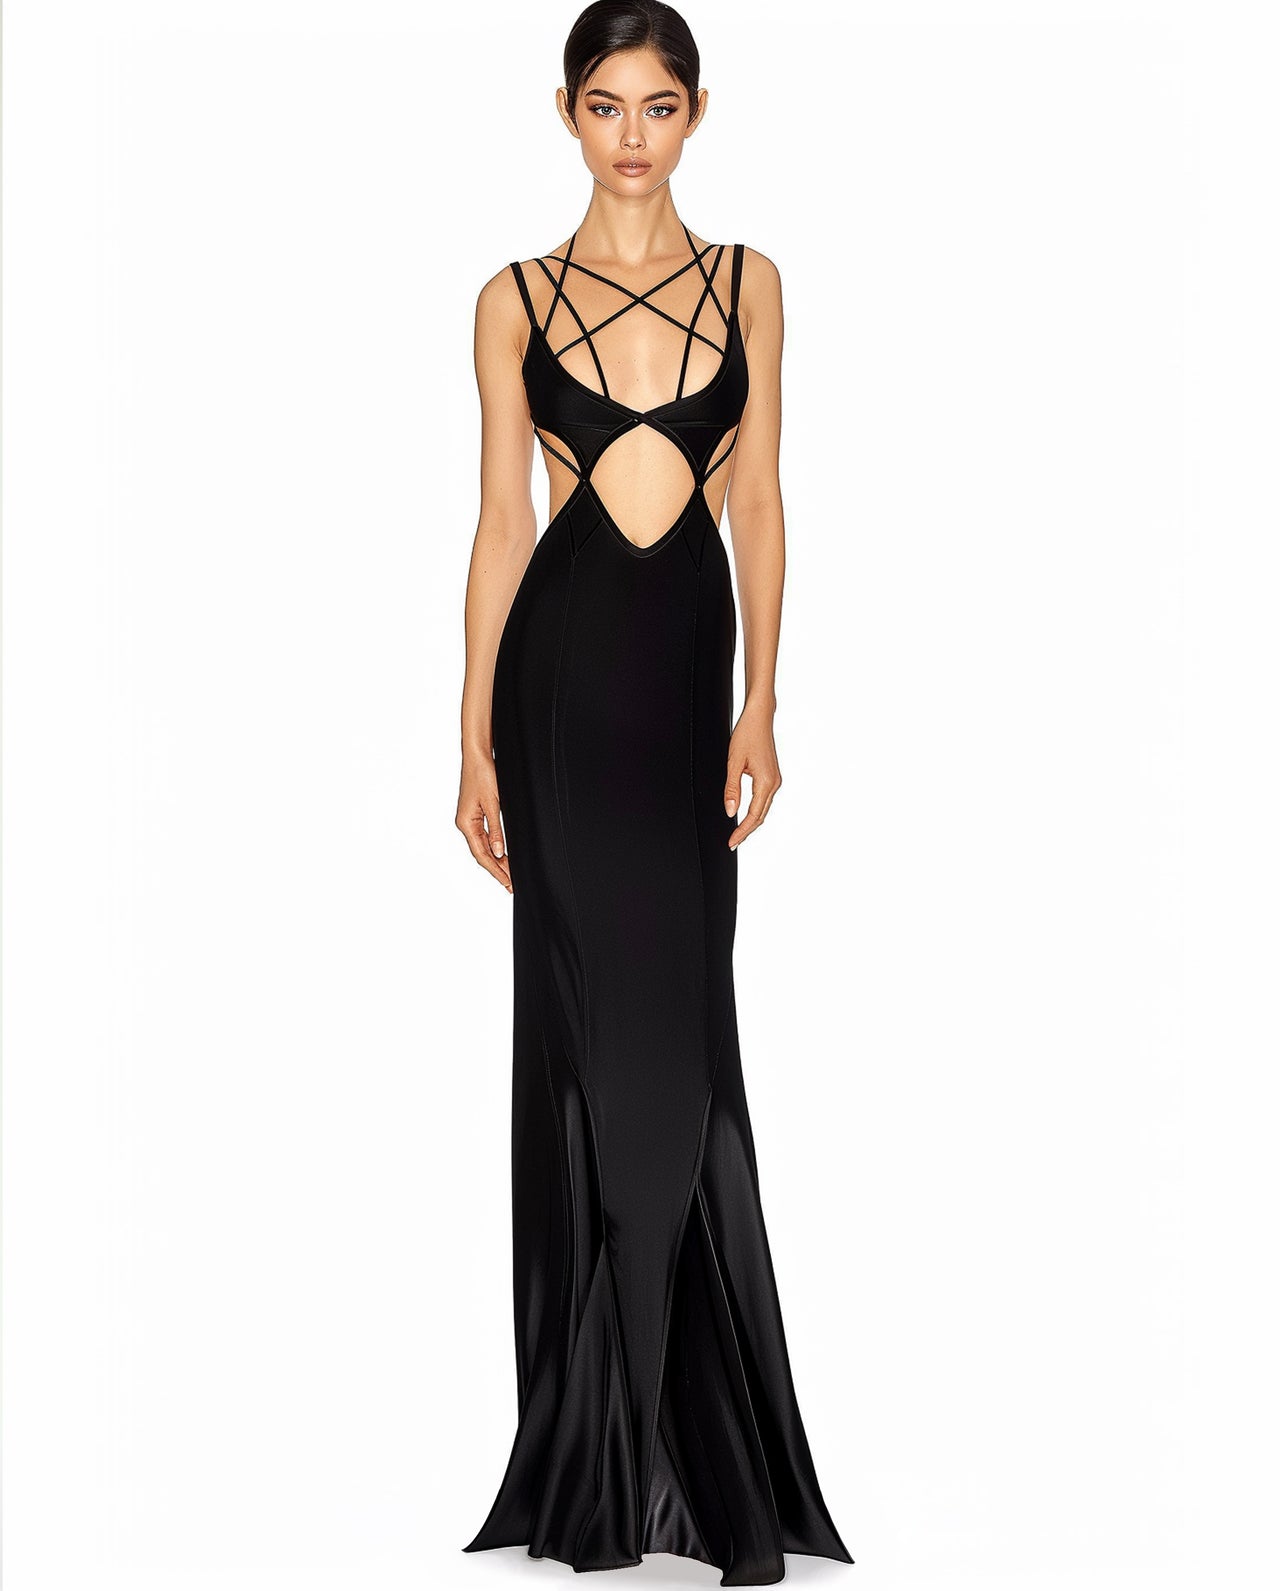 Strappy Cut-Out Maxi Dress - Black